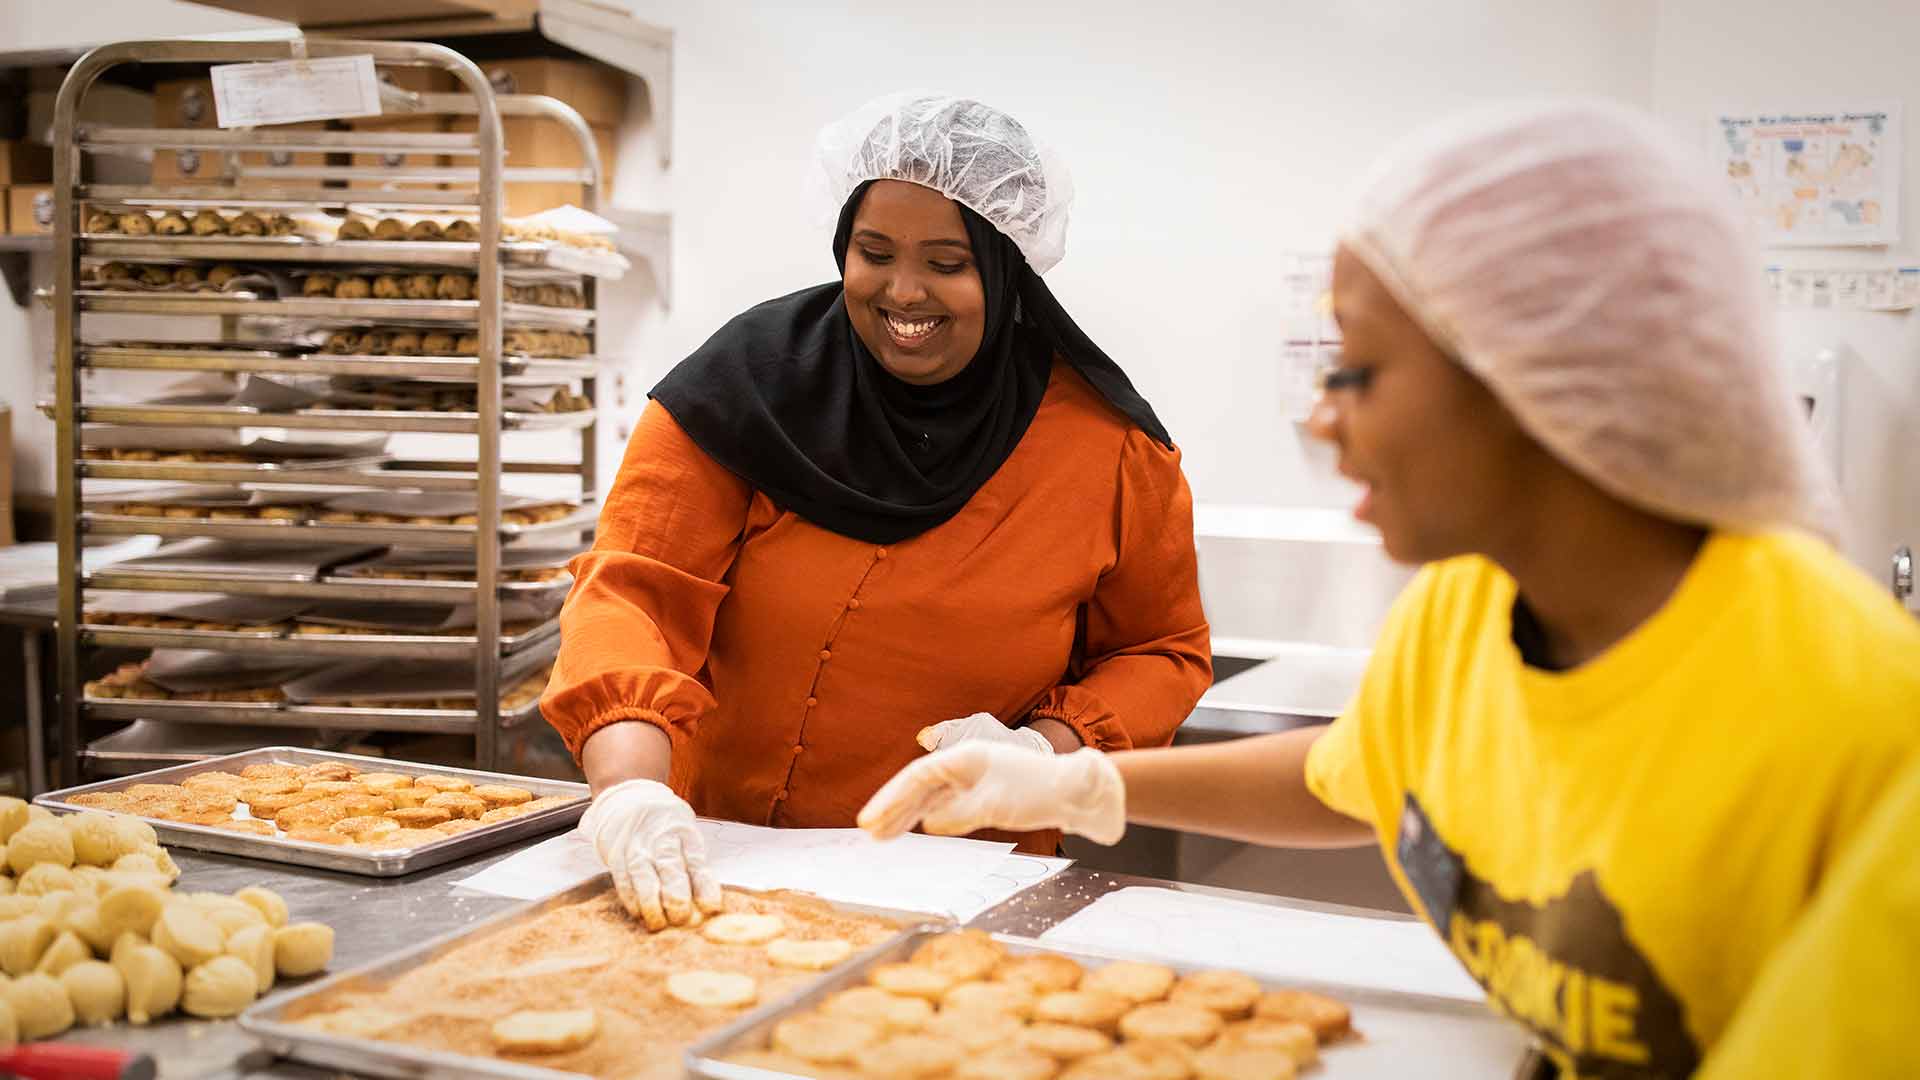 Students work at non-profit bakery